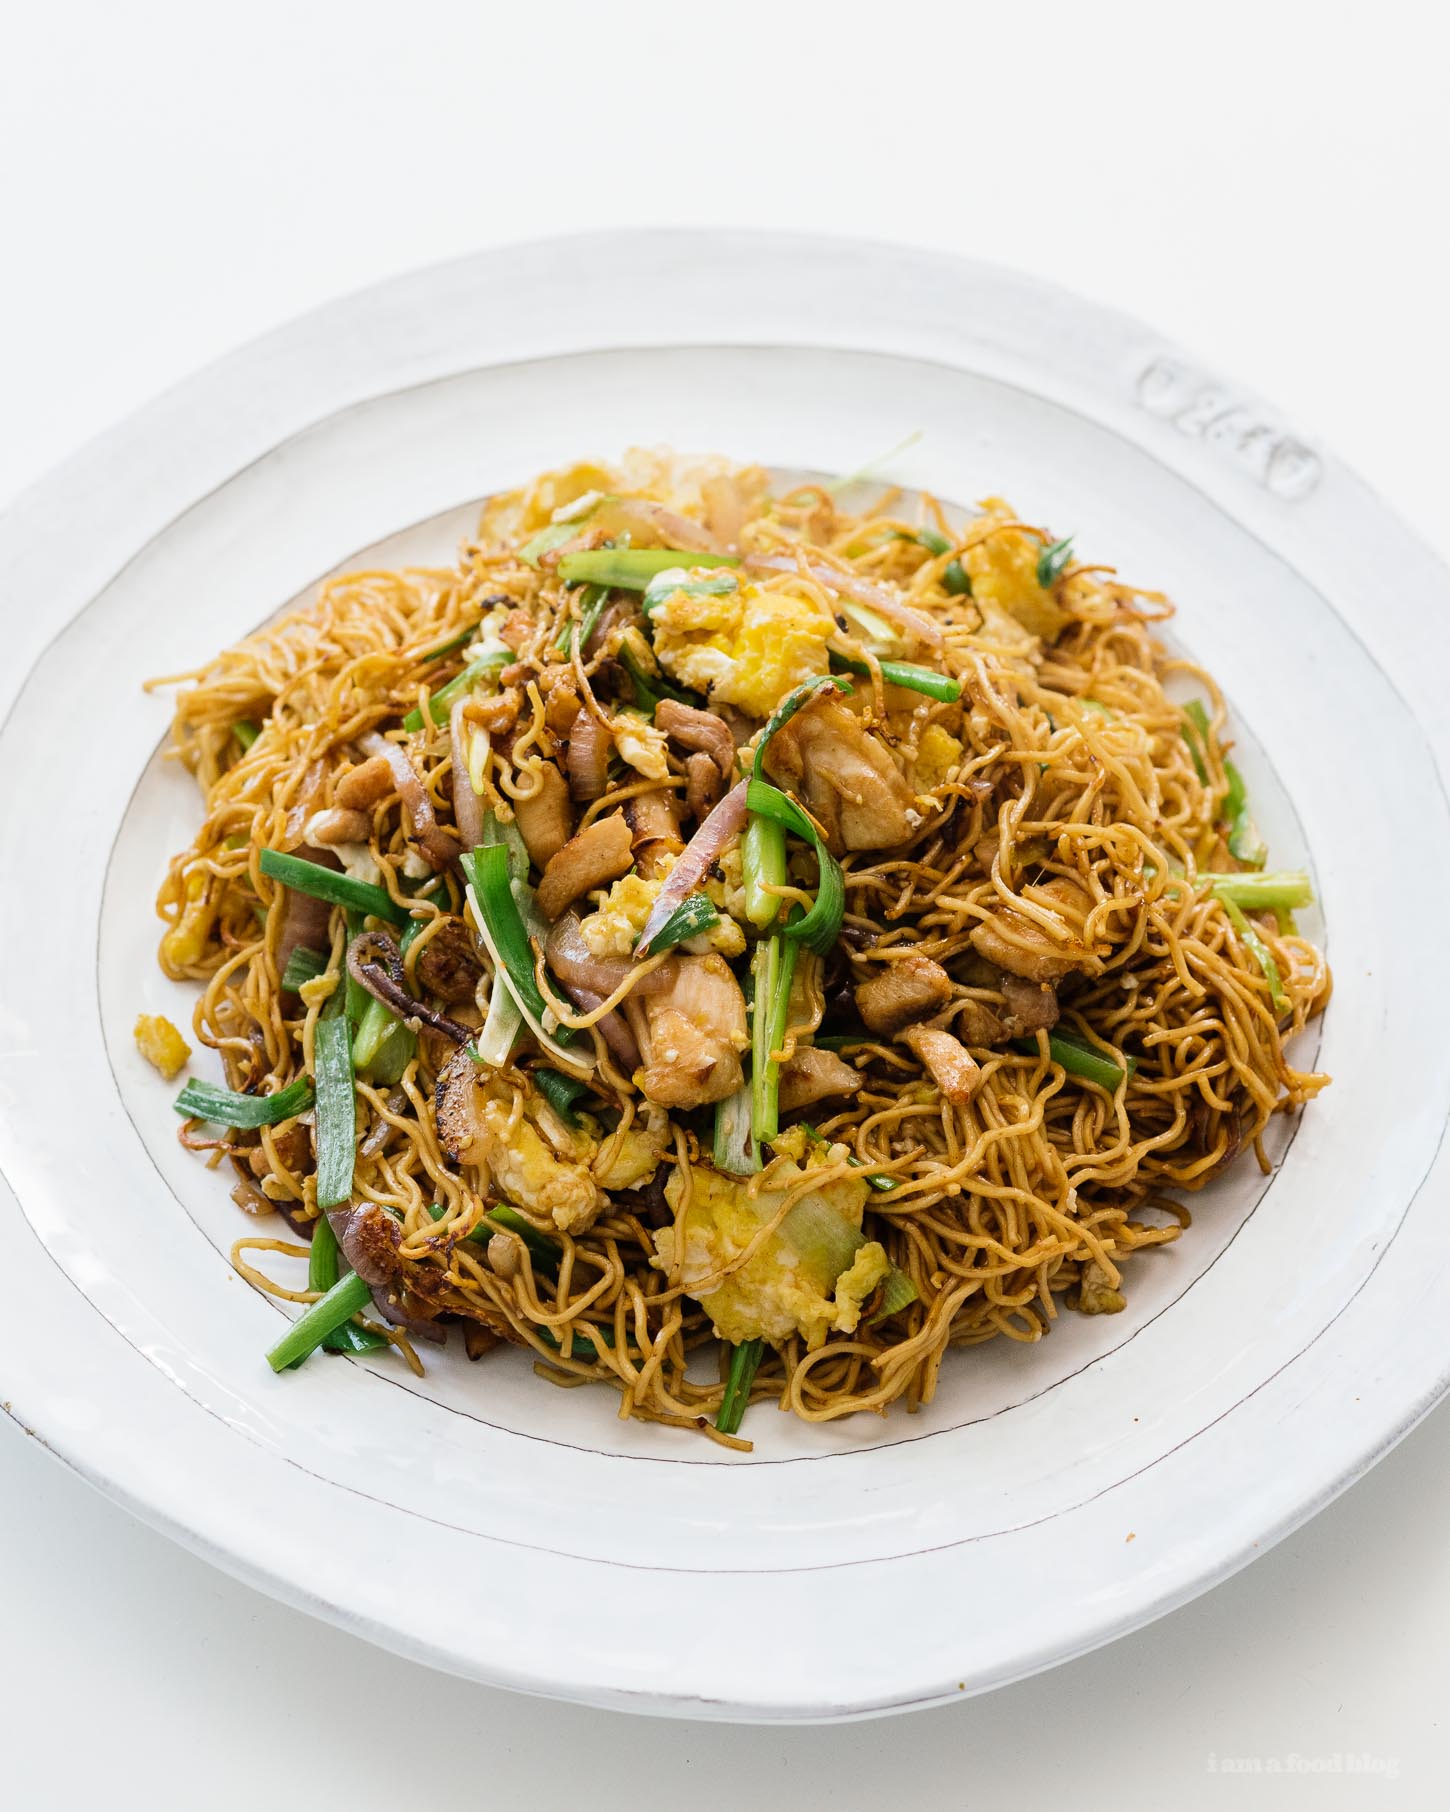 15 Minute Easy Chicken Chow Mein Recipe | www.iamafoodblog.com